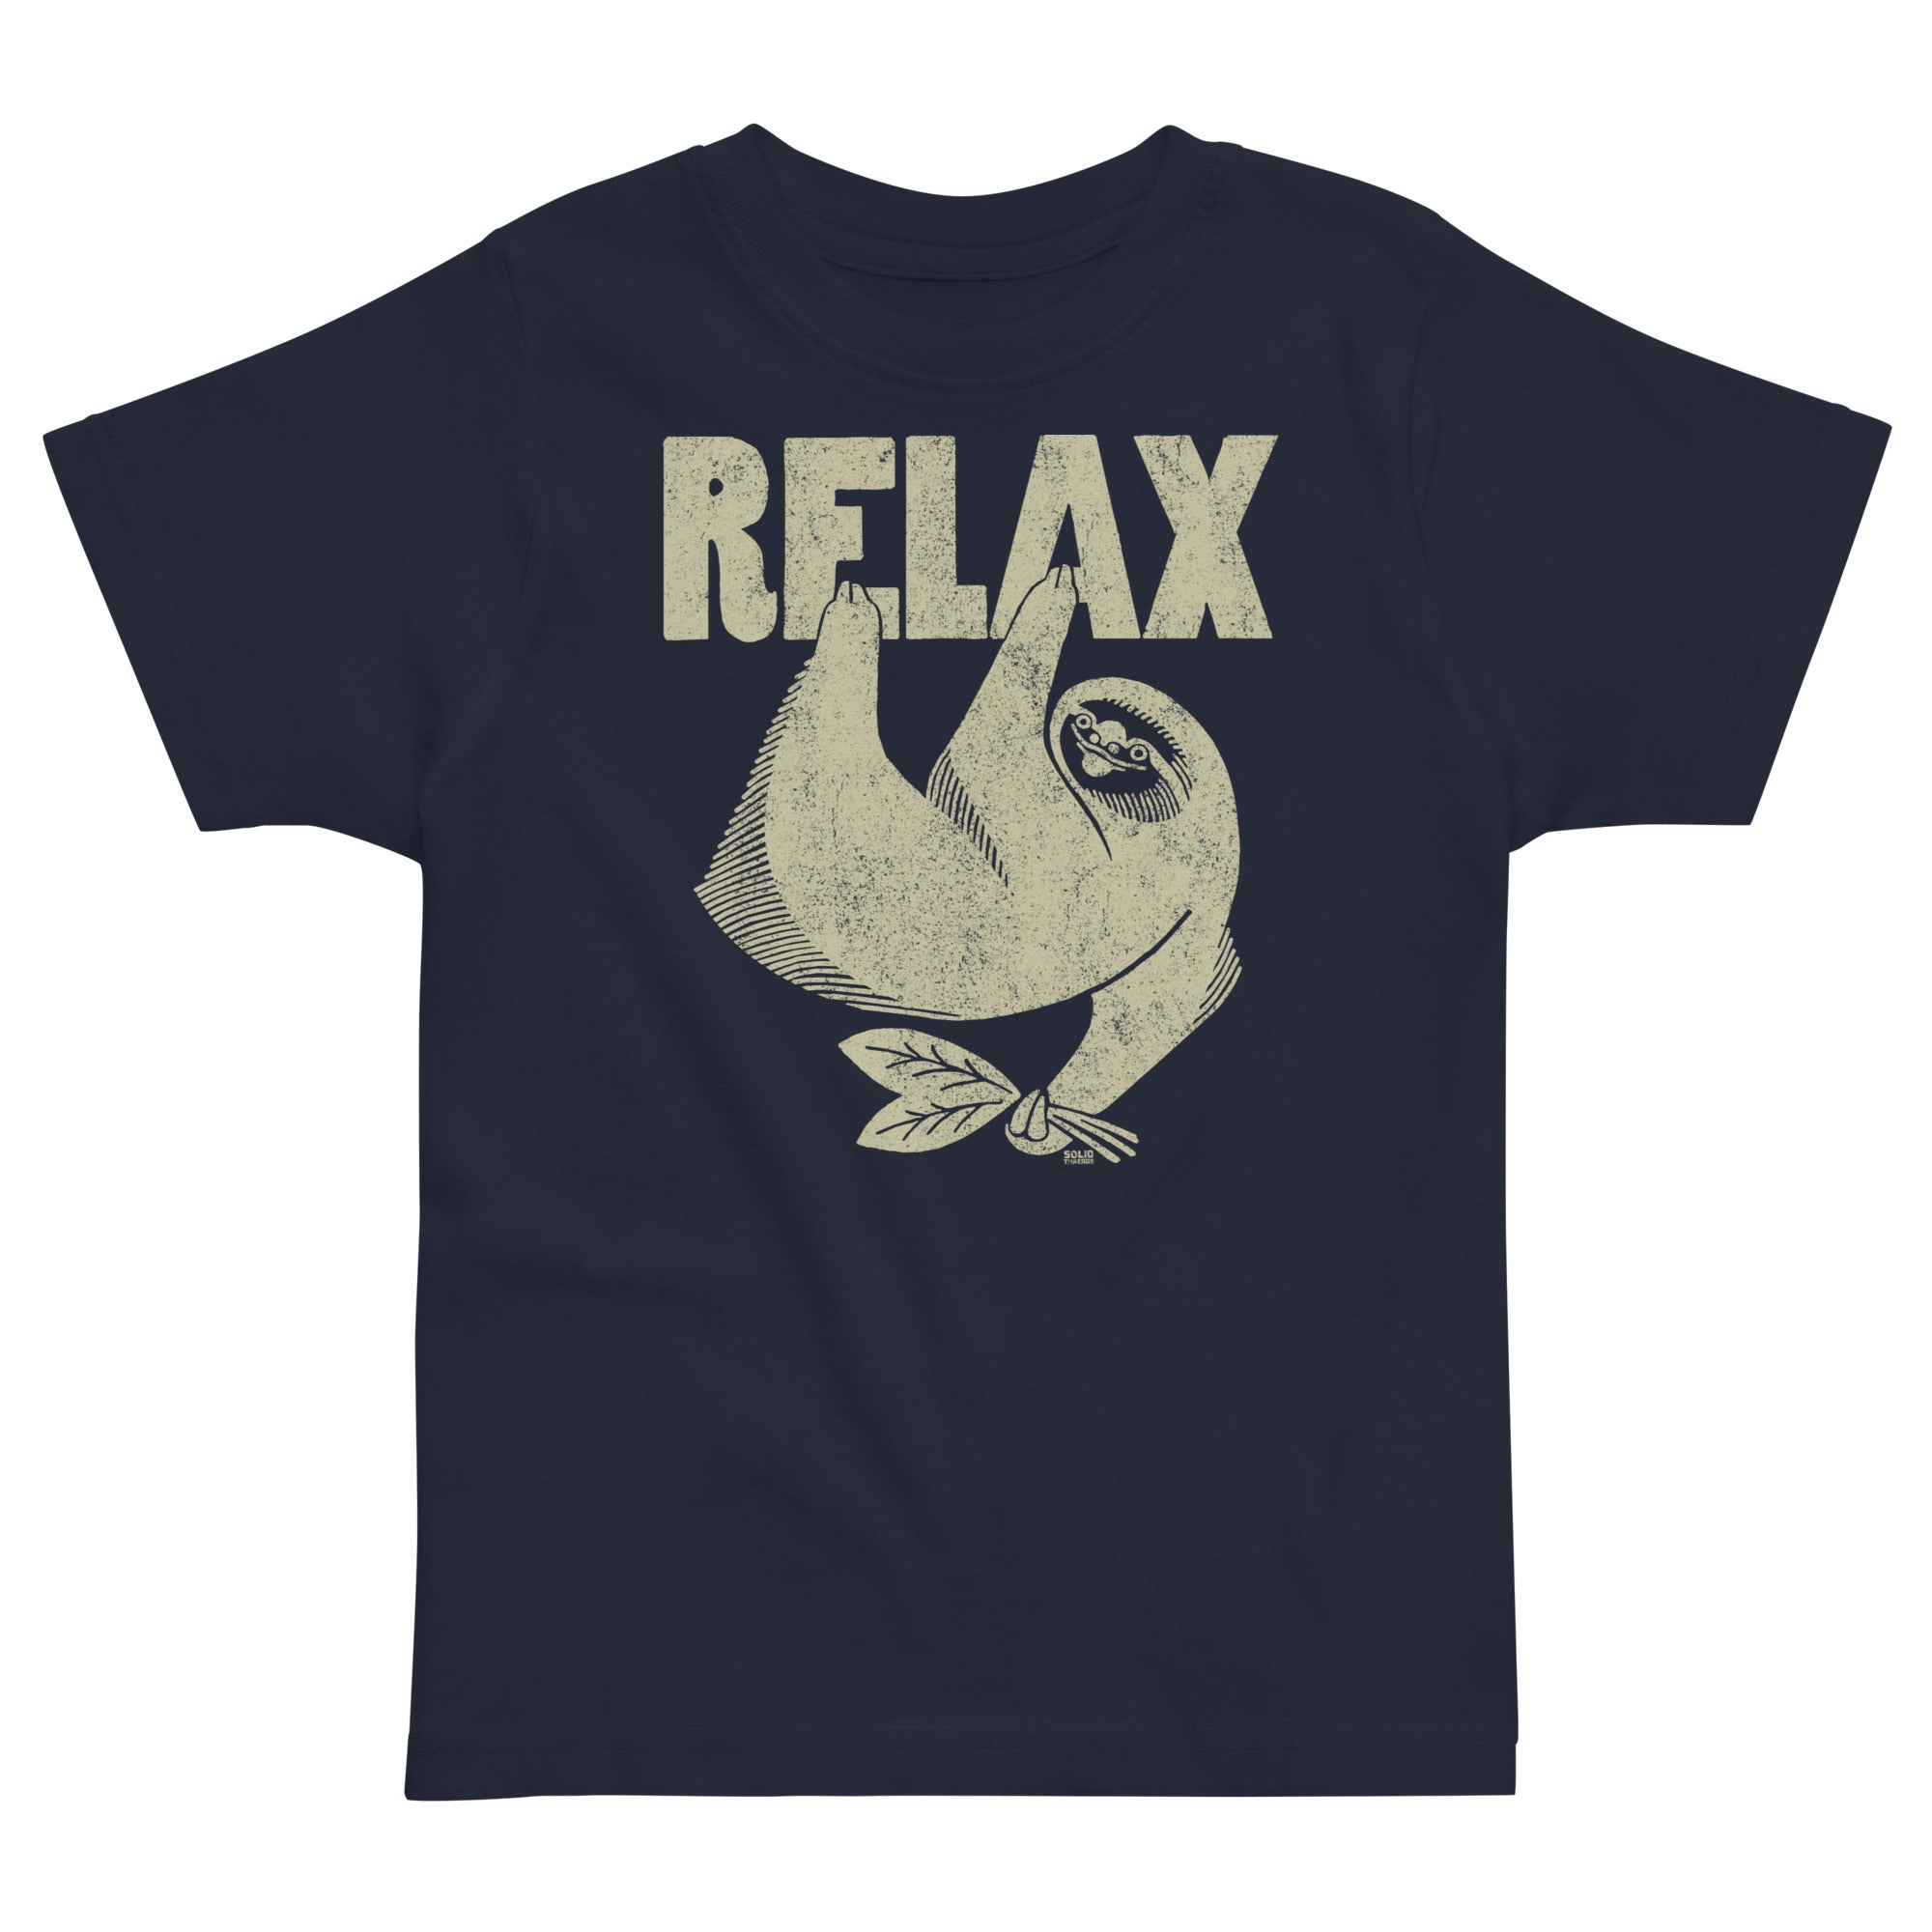 Toddler's Relax Retro Graphic T-Shirt | Funny Sloth Tee | Solid Threads